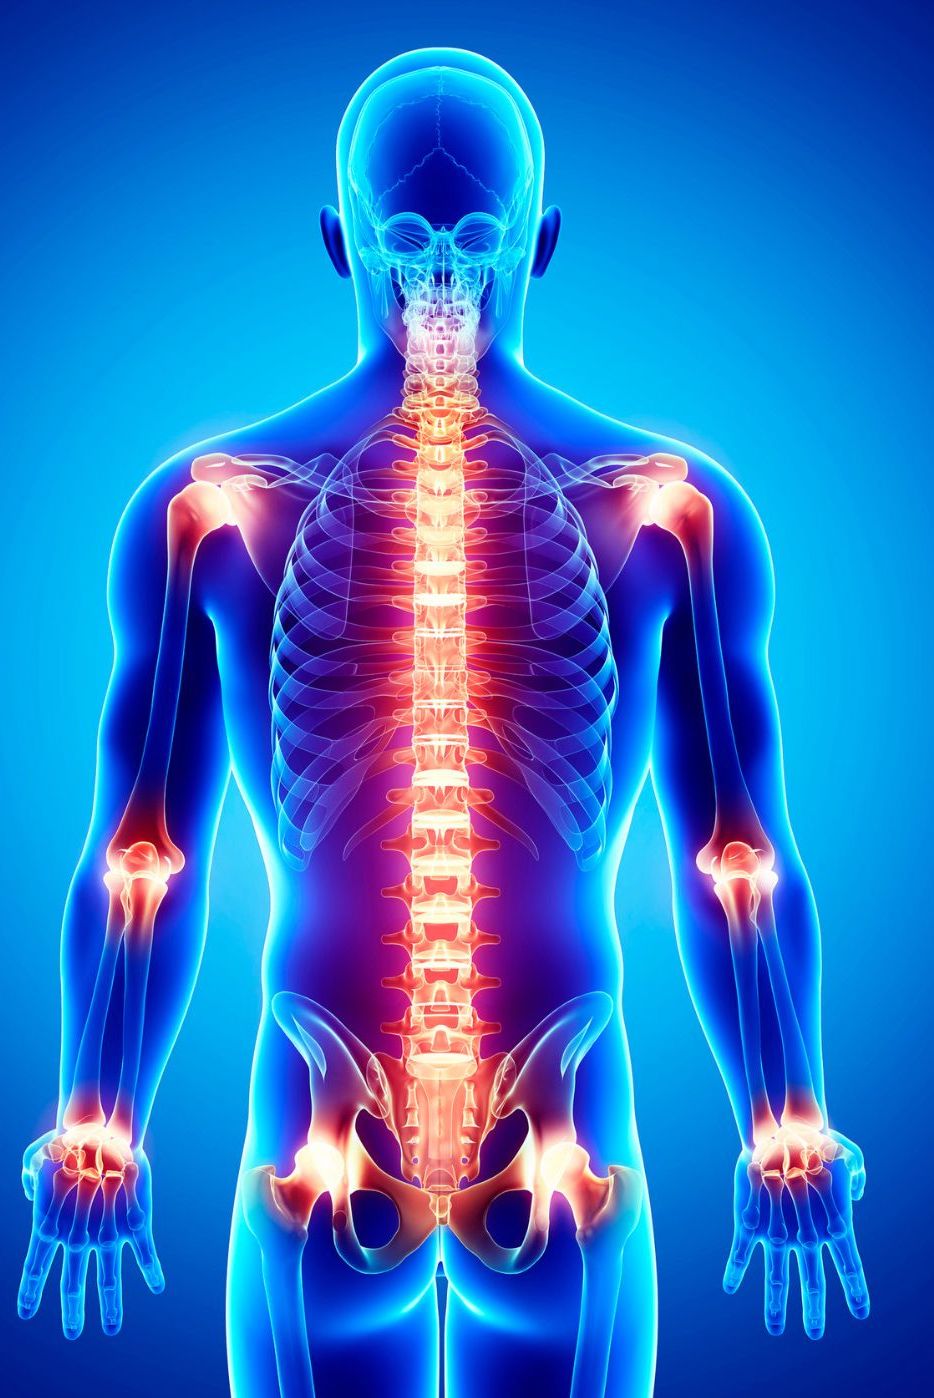 Illustration of a human body highlighting the skeletal system with glowing joints in the hands, hips, knees, and spine against a blue background. The image emphasizes areas typically affected by arthritis.